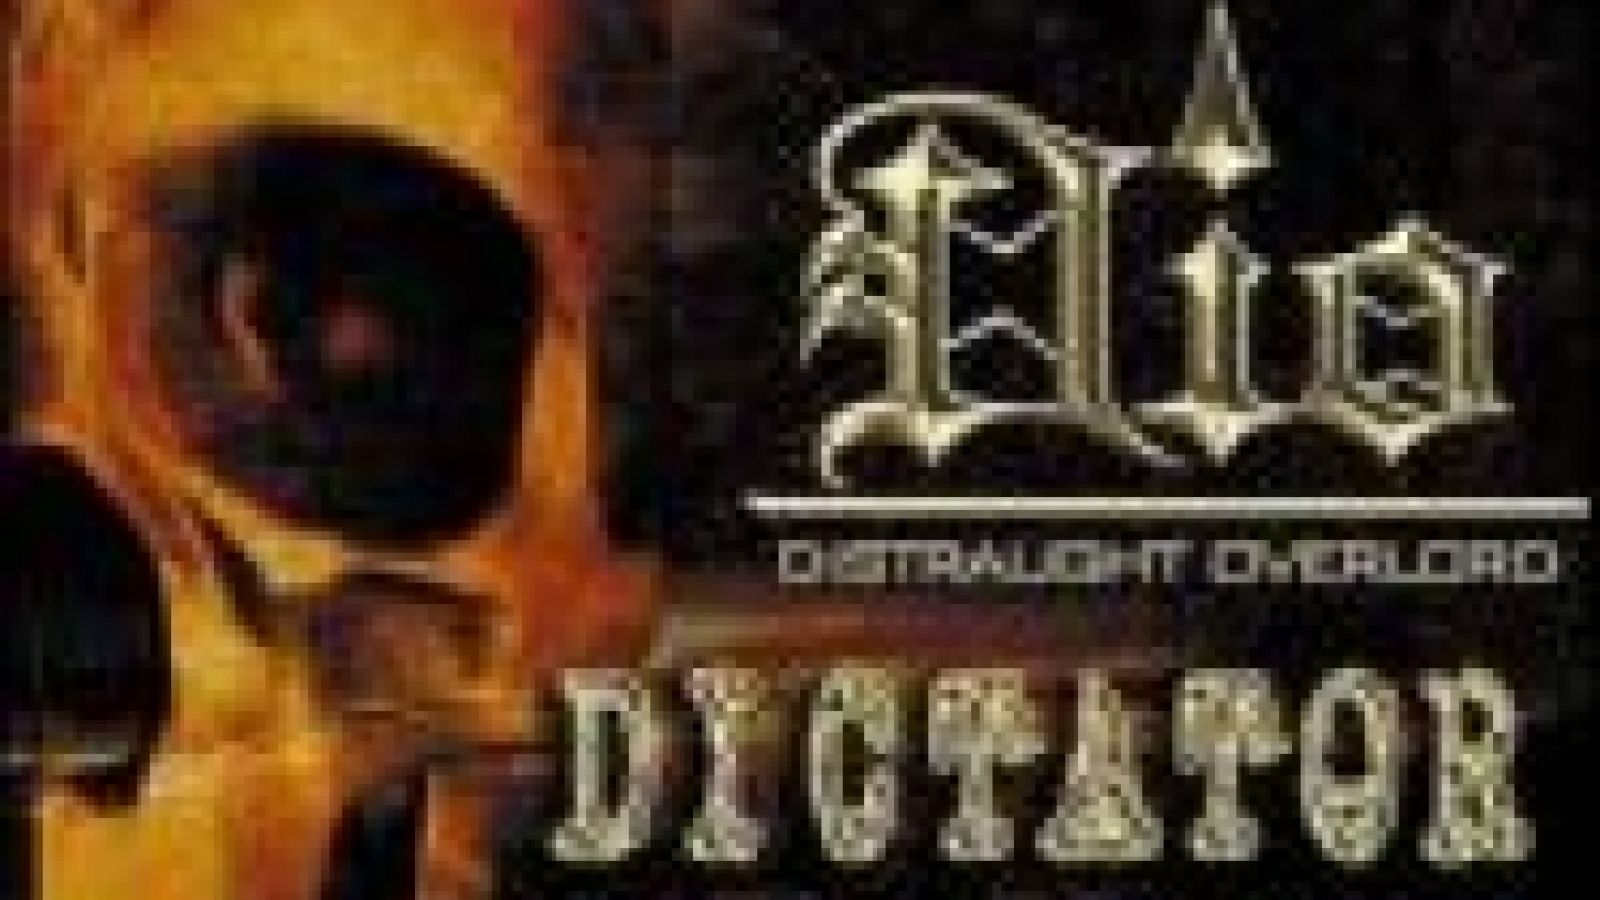 Dio - distraught overlord - DICTATOR © Dio